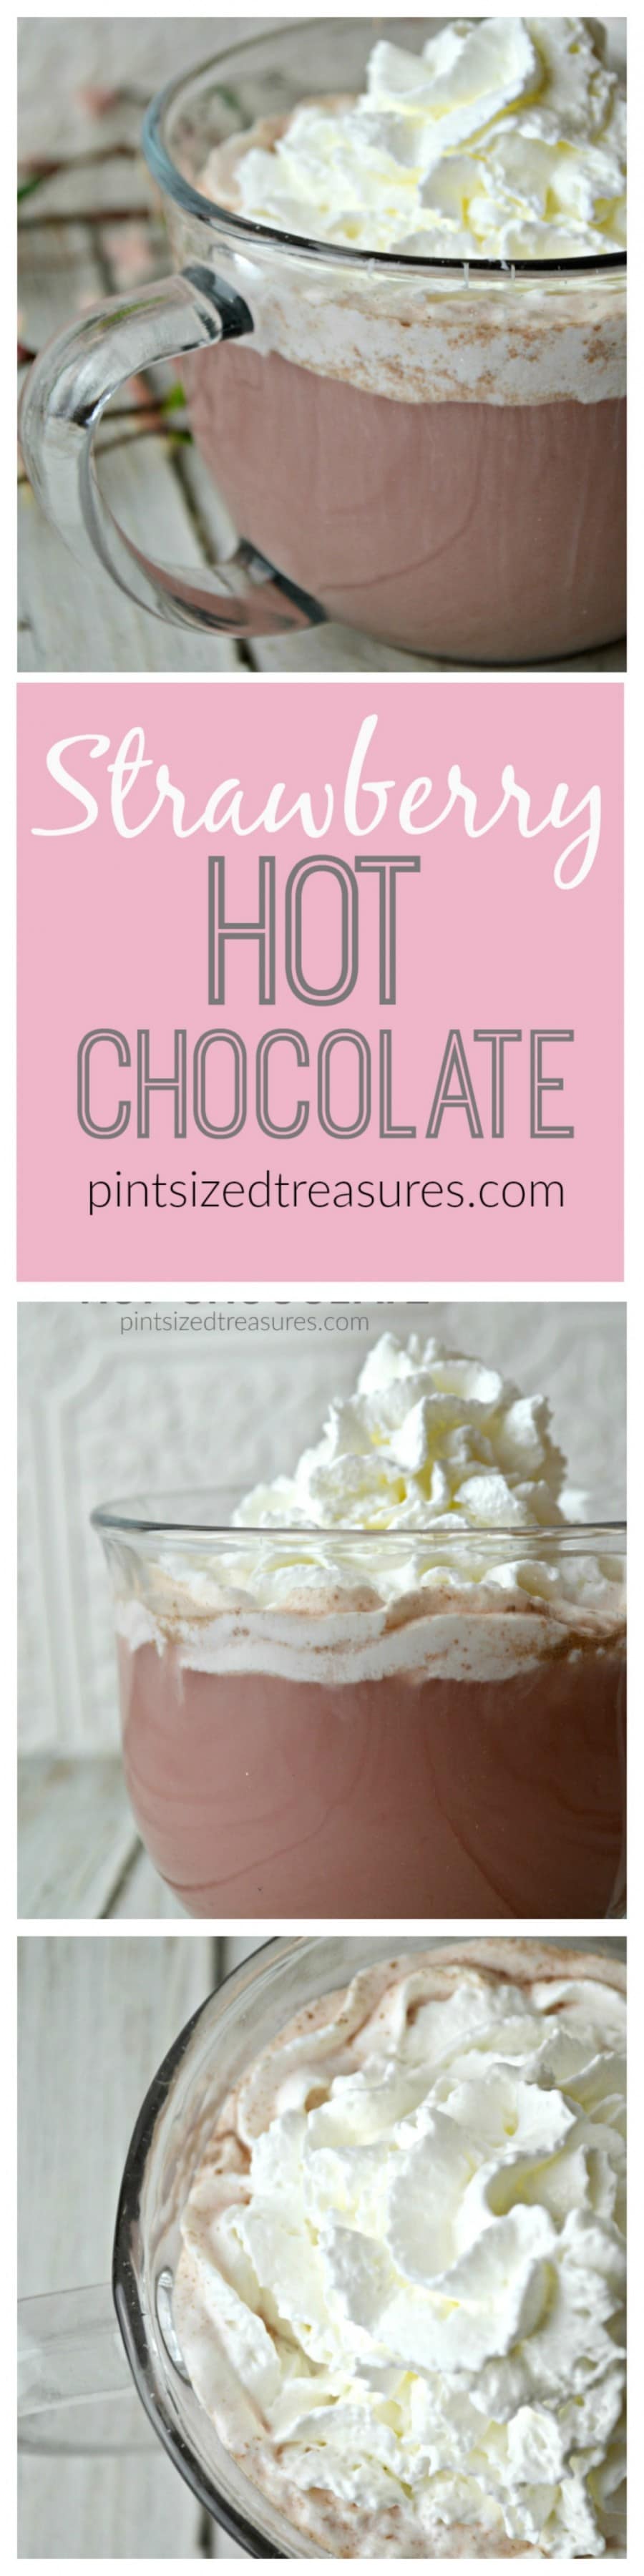 hot chocolate with strawberry recipes